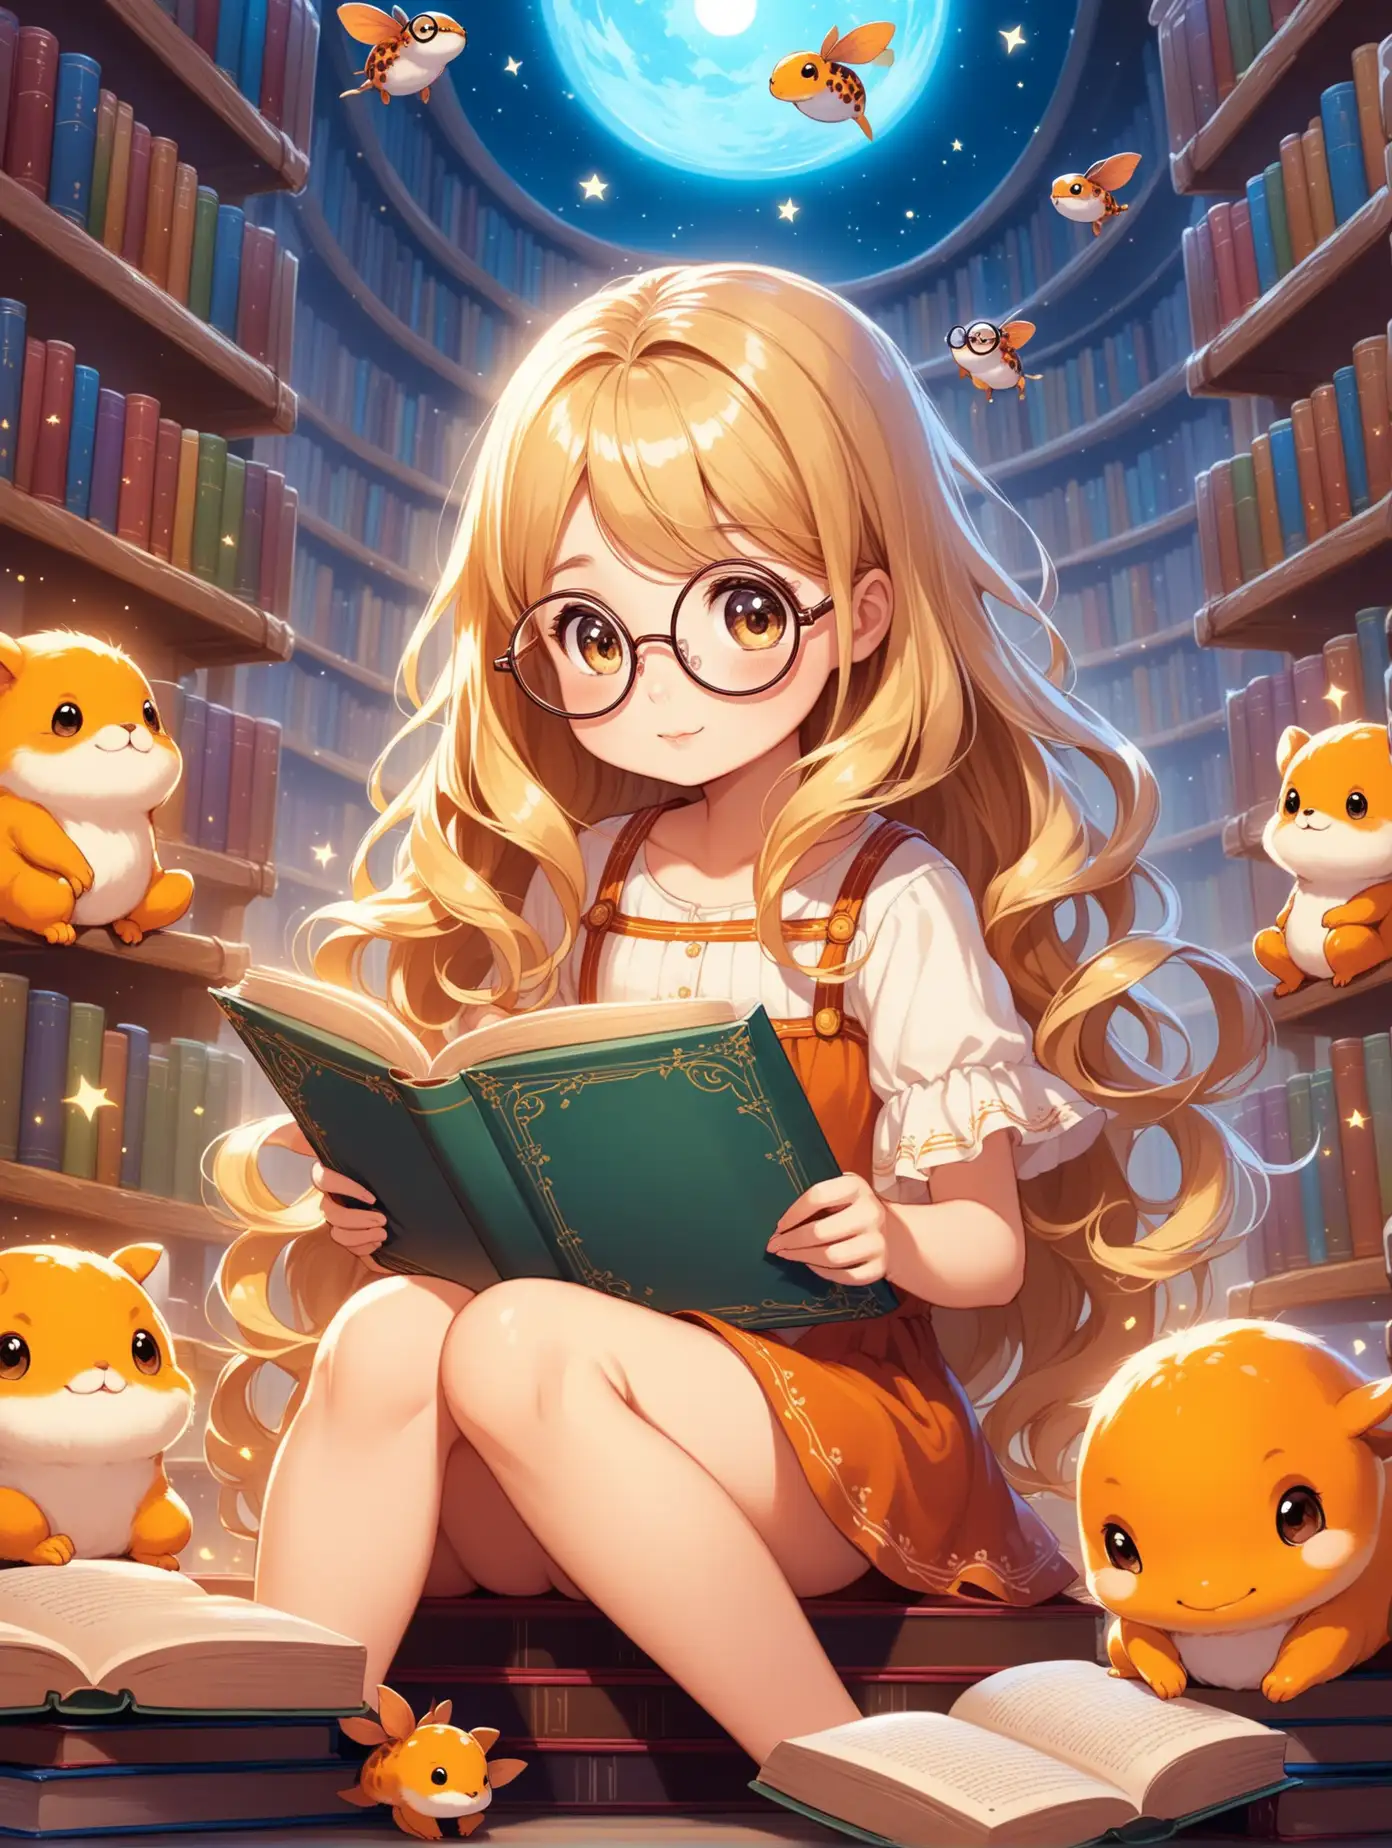 a cute little cartoon girl wearing big round glasses, blond curled hair, surrounded by little creatures, reading a book, and sitting on different books in a fantasy library